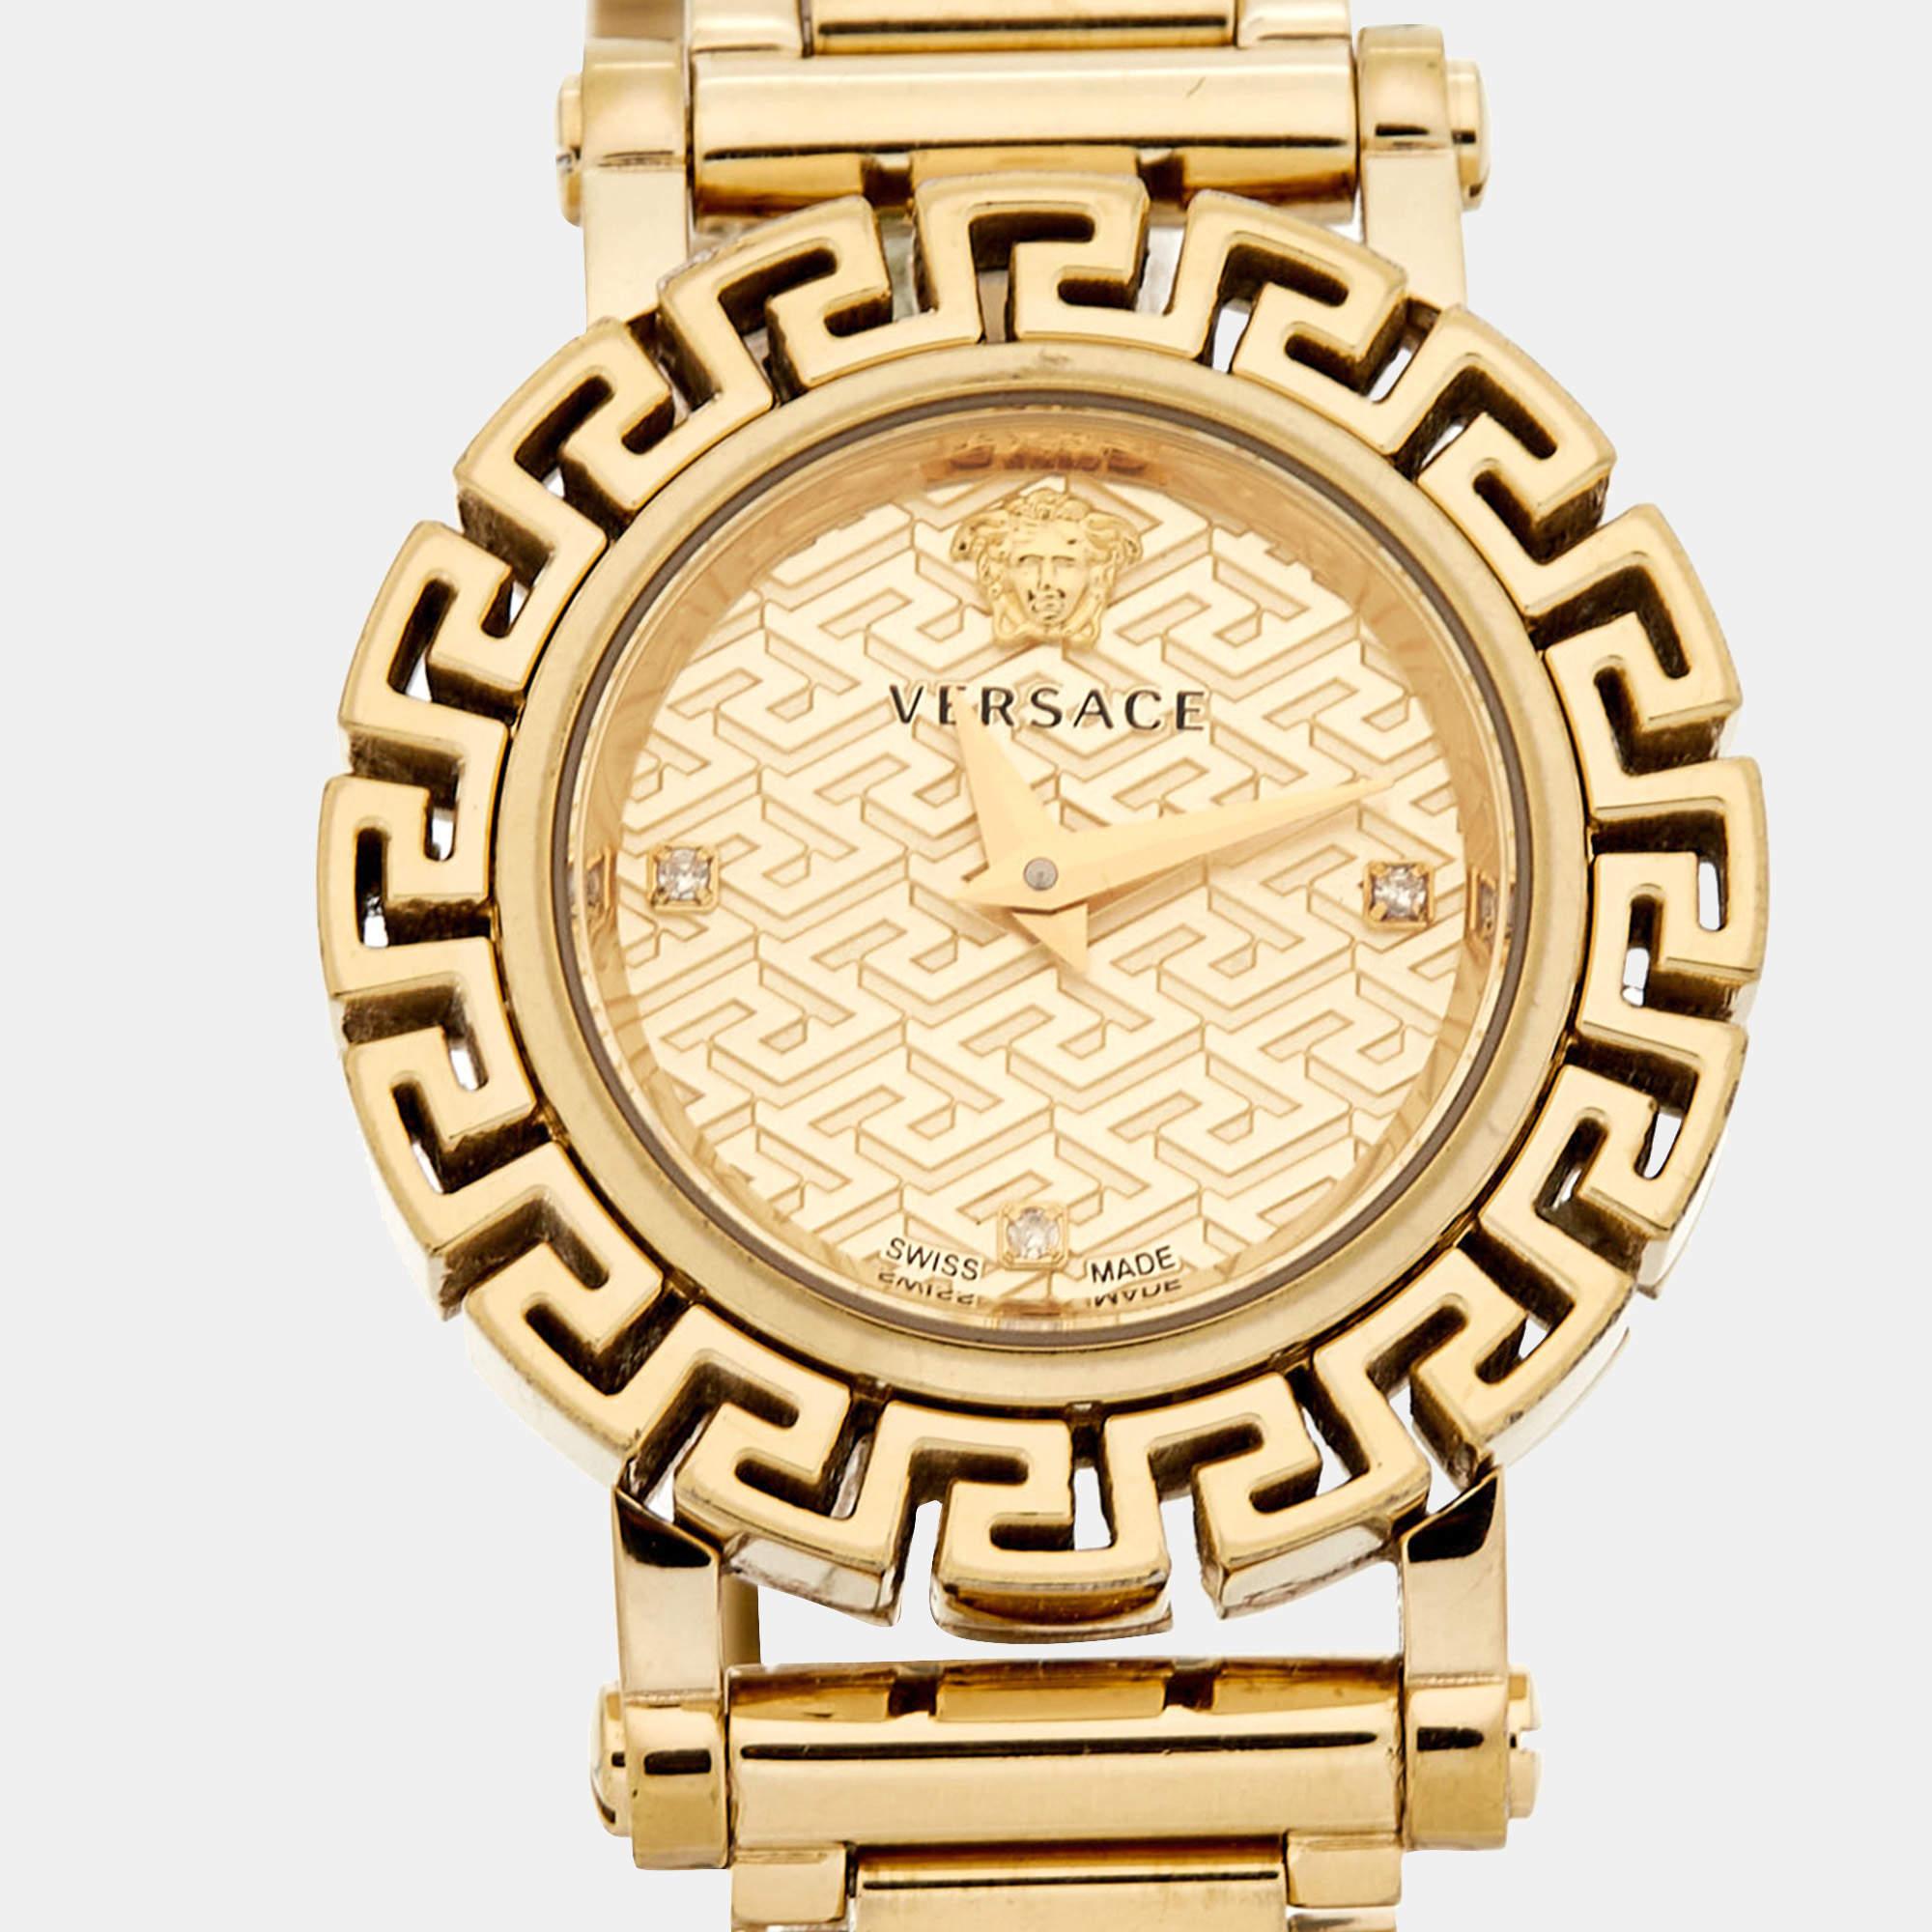 Versace Champagne Gold Plated Stainless Greca Glam Women's Wristwatch 29 mm 3